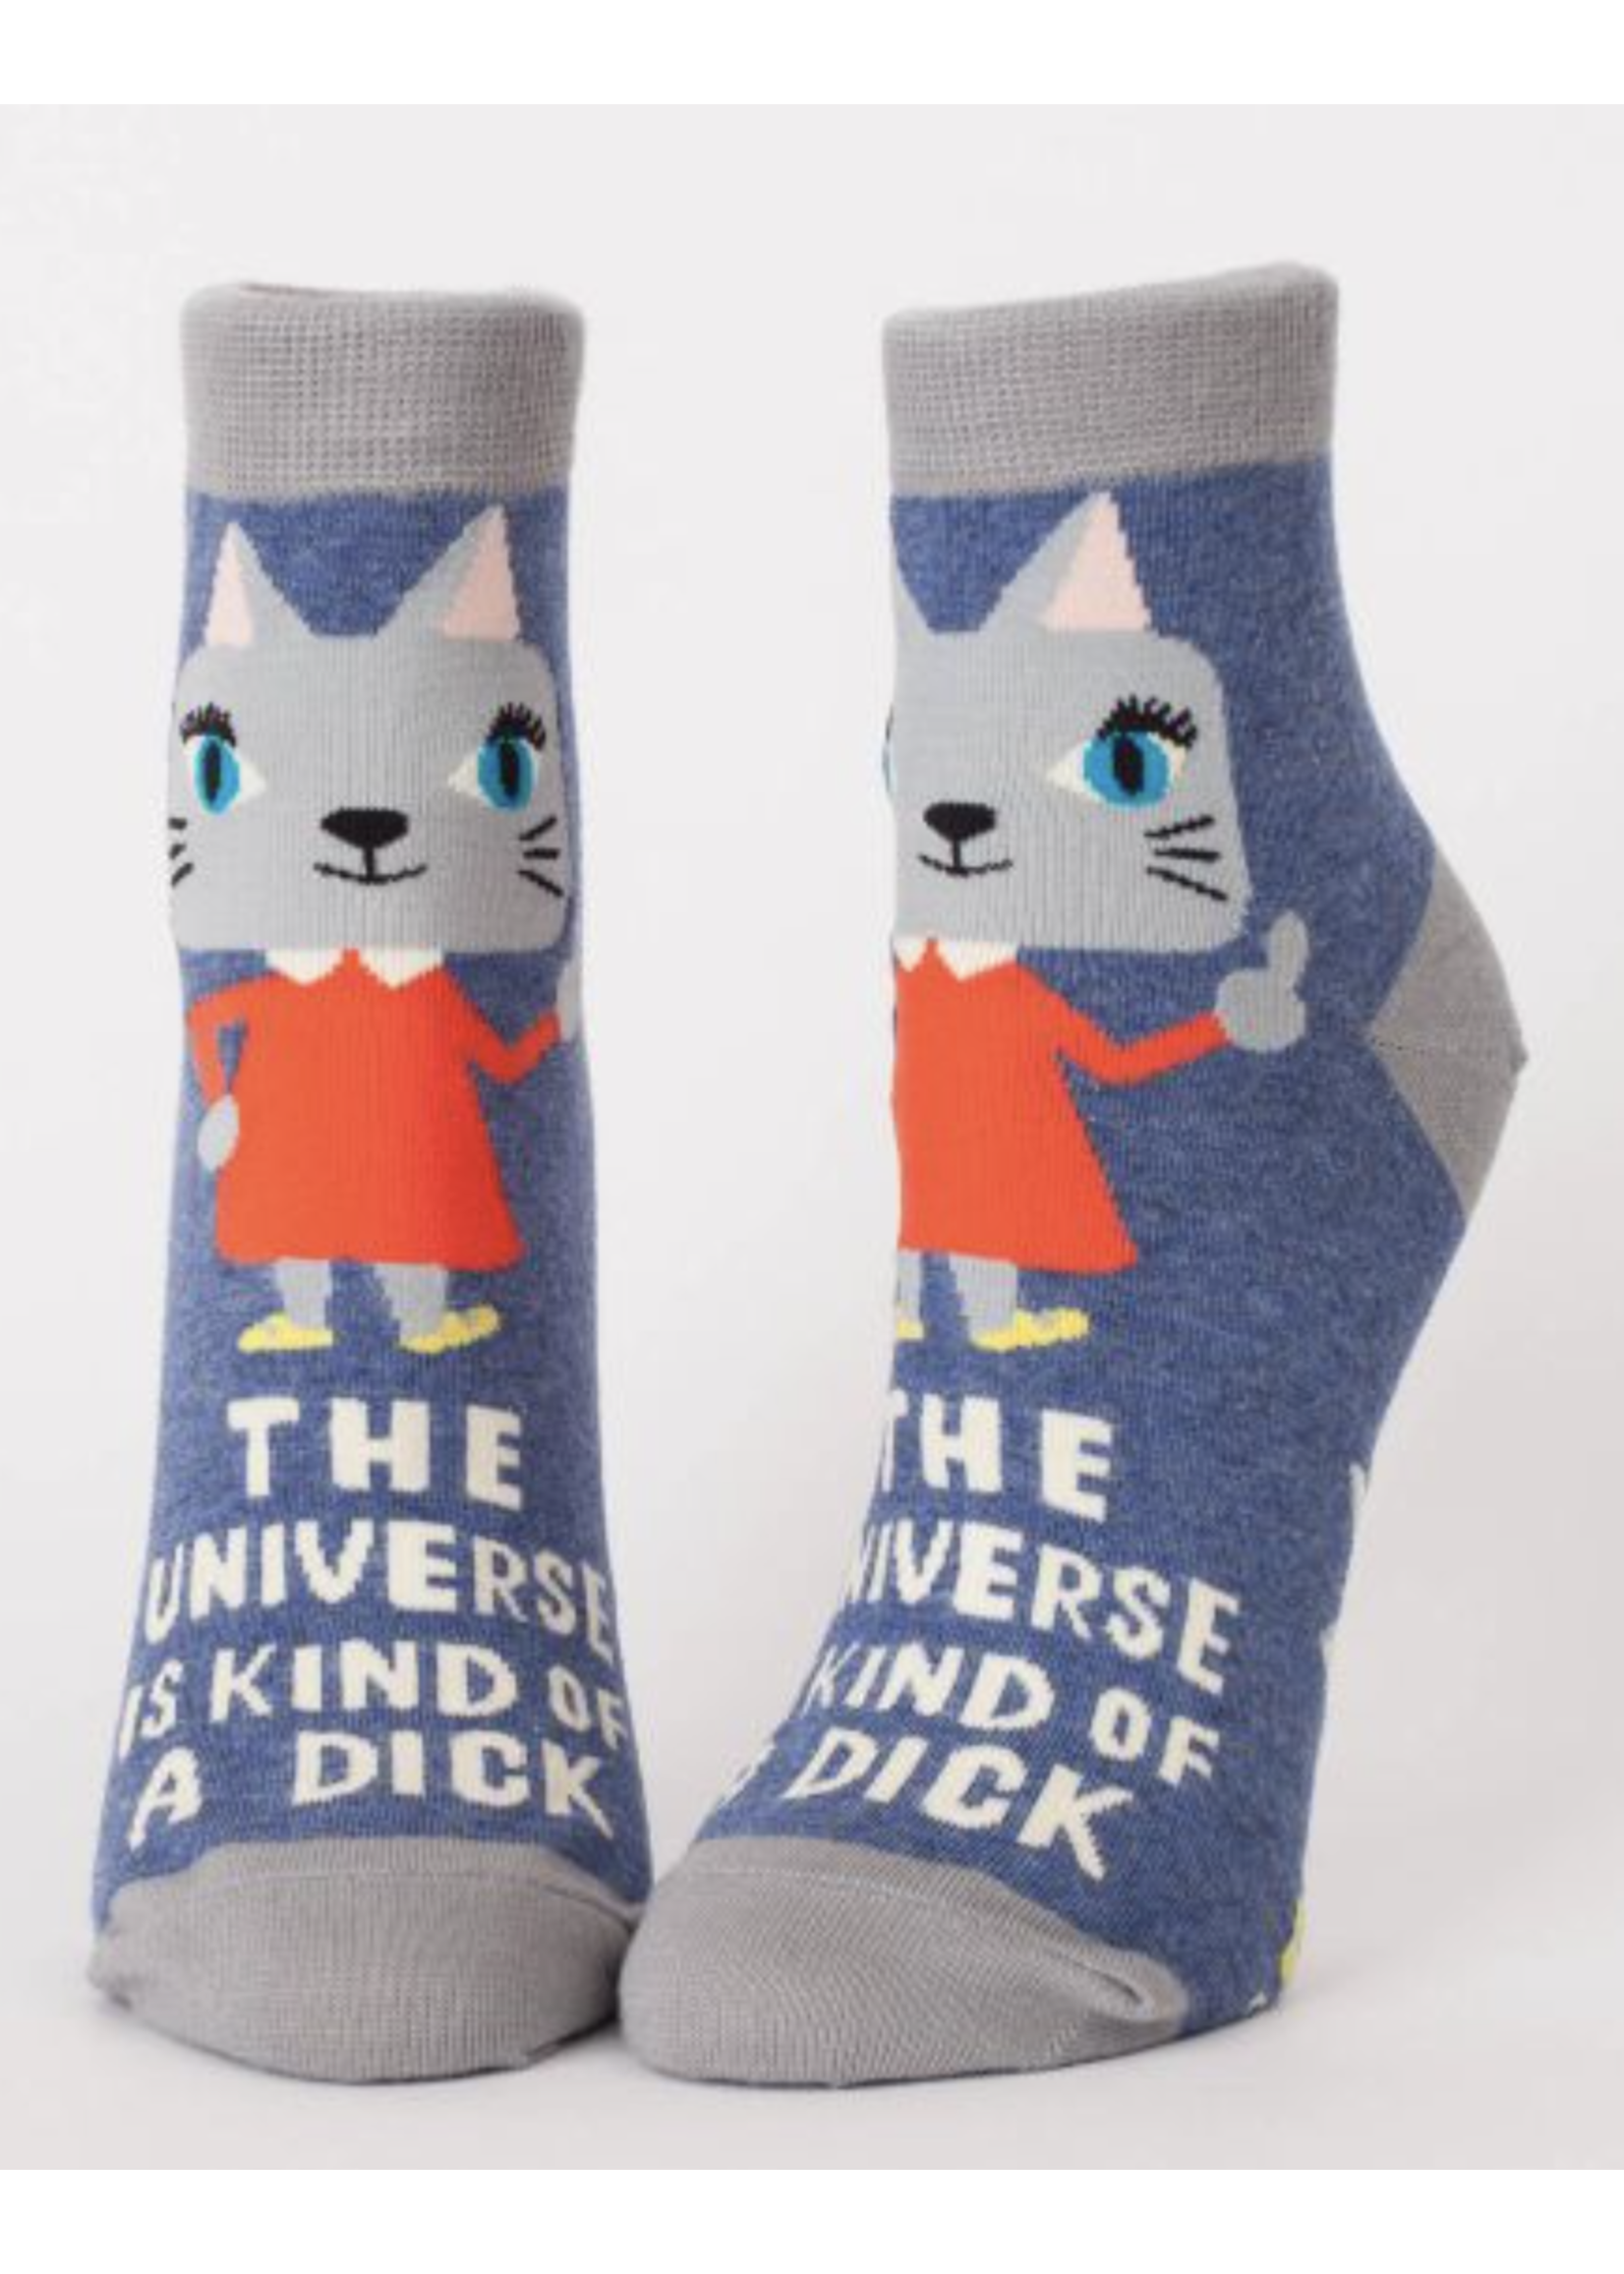 Blue Q Universe is a Dick Ankle Socks